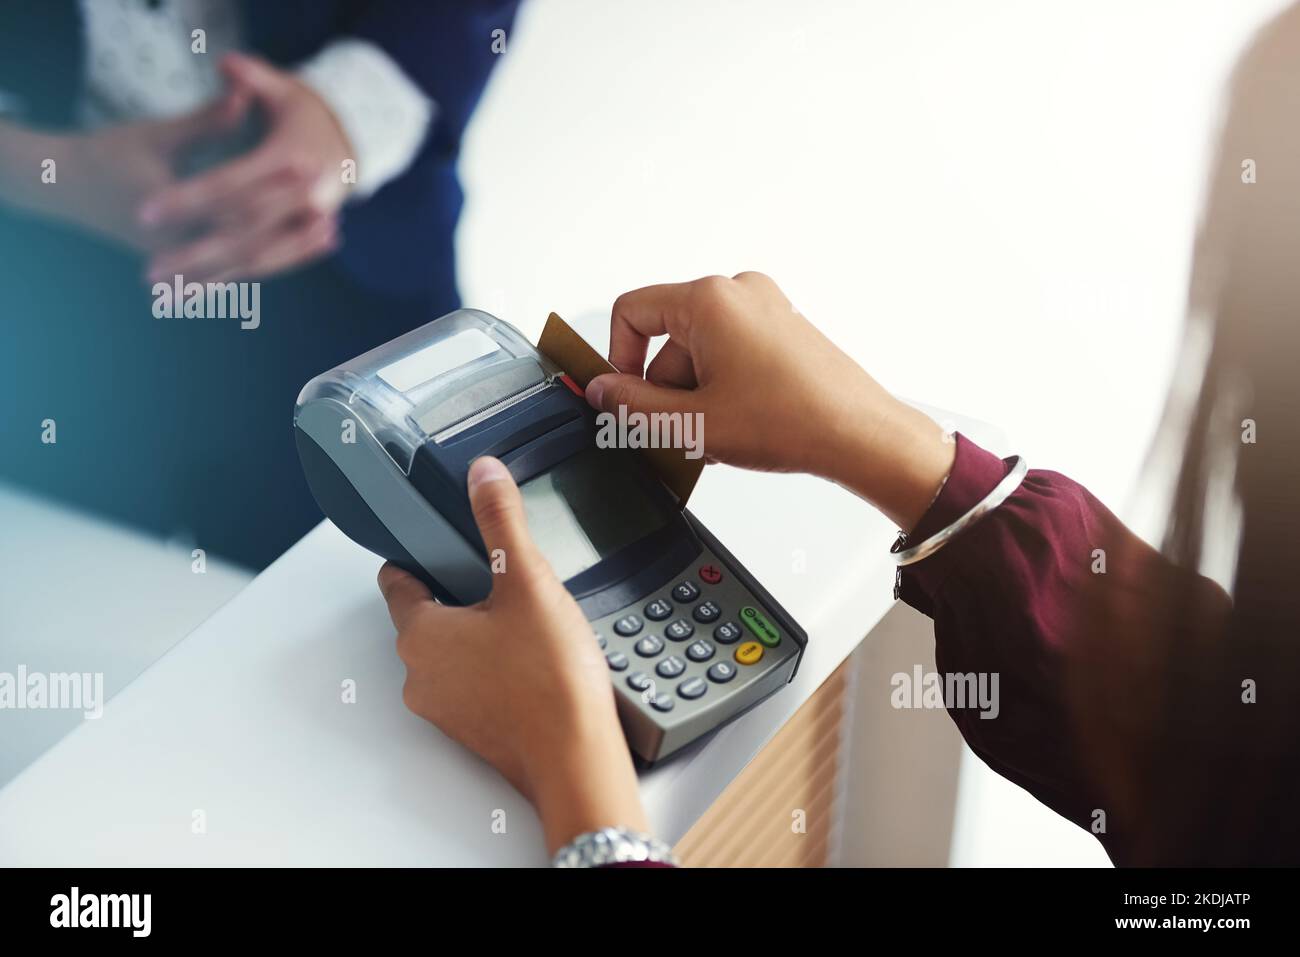 One swipe and youre all paid. an unrecognisable person swiping a credit card for payment. Stock Photo